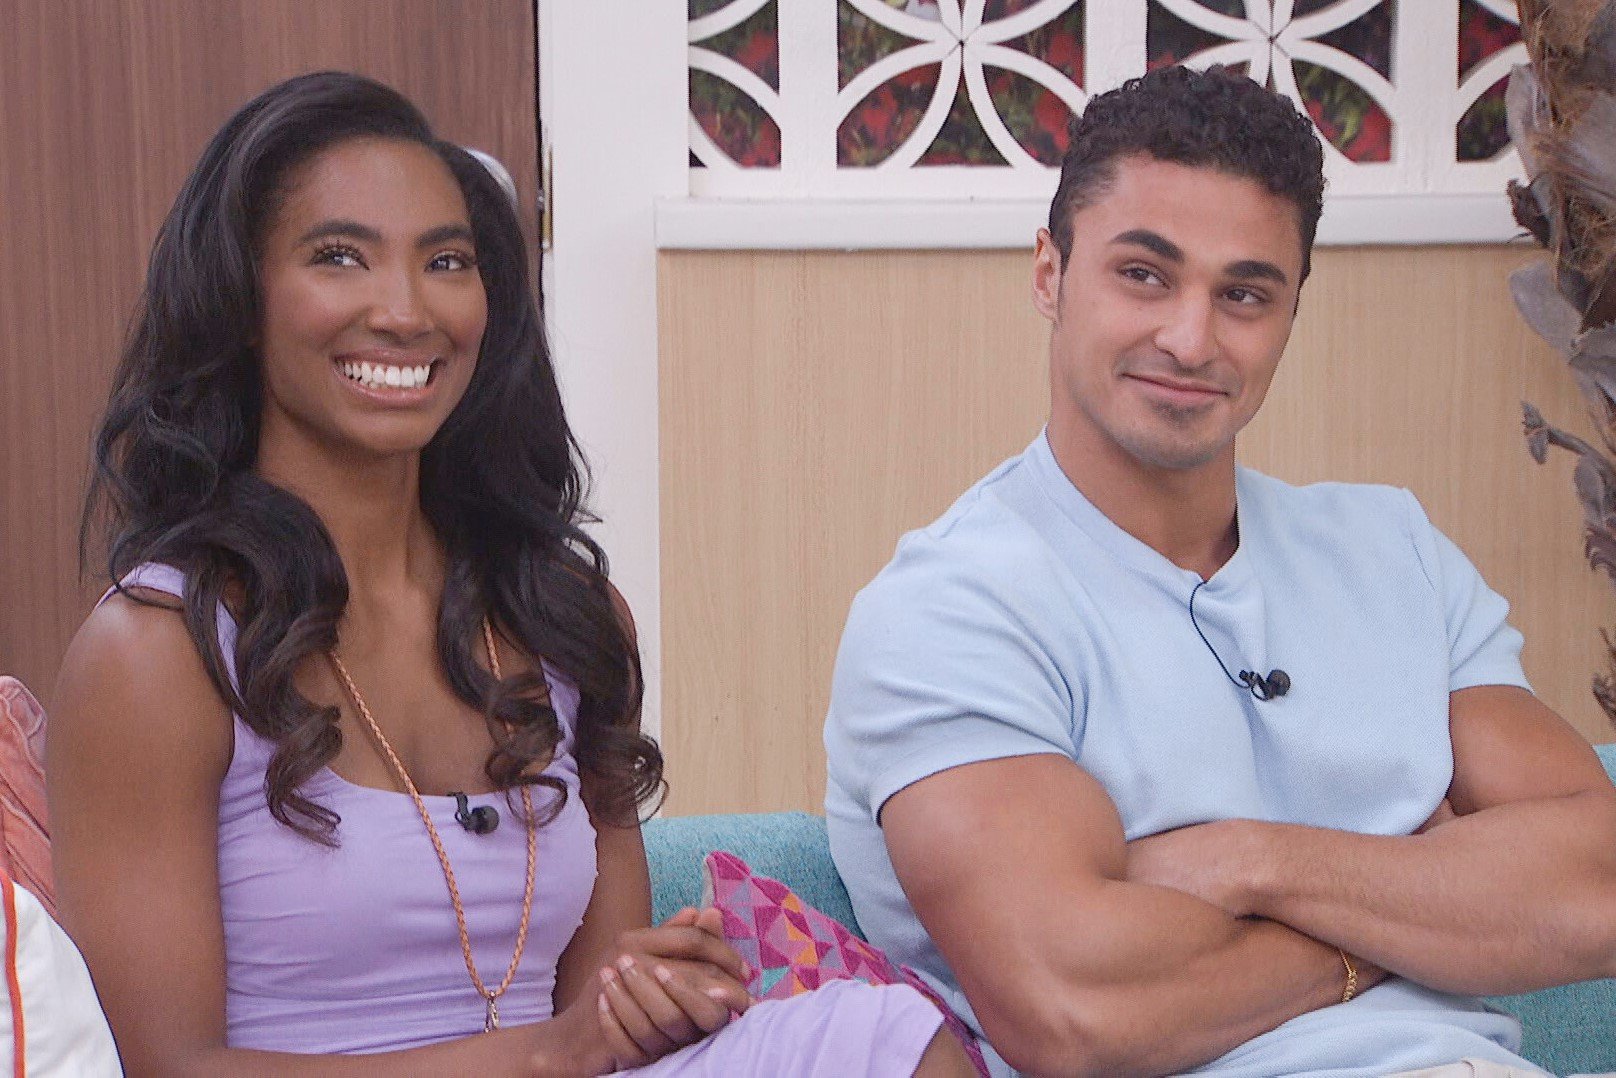 Taylor Hale and Joseph Abdin, who met in 'Big Brother 24' on CBS, sit next to each other on a couch. Taylor wears a light purple dress. Joseph wears a light blue shirt.